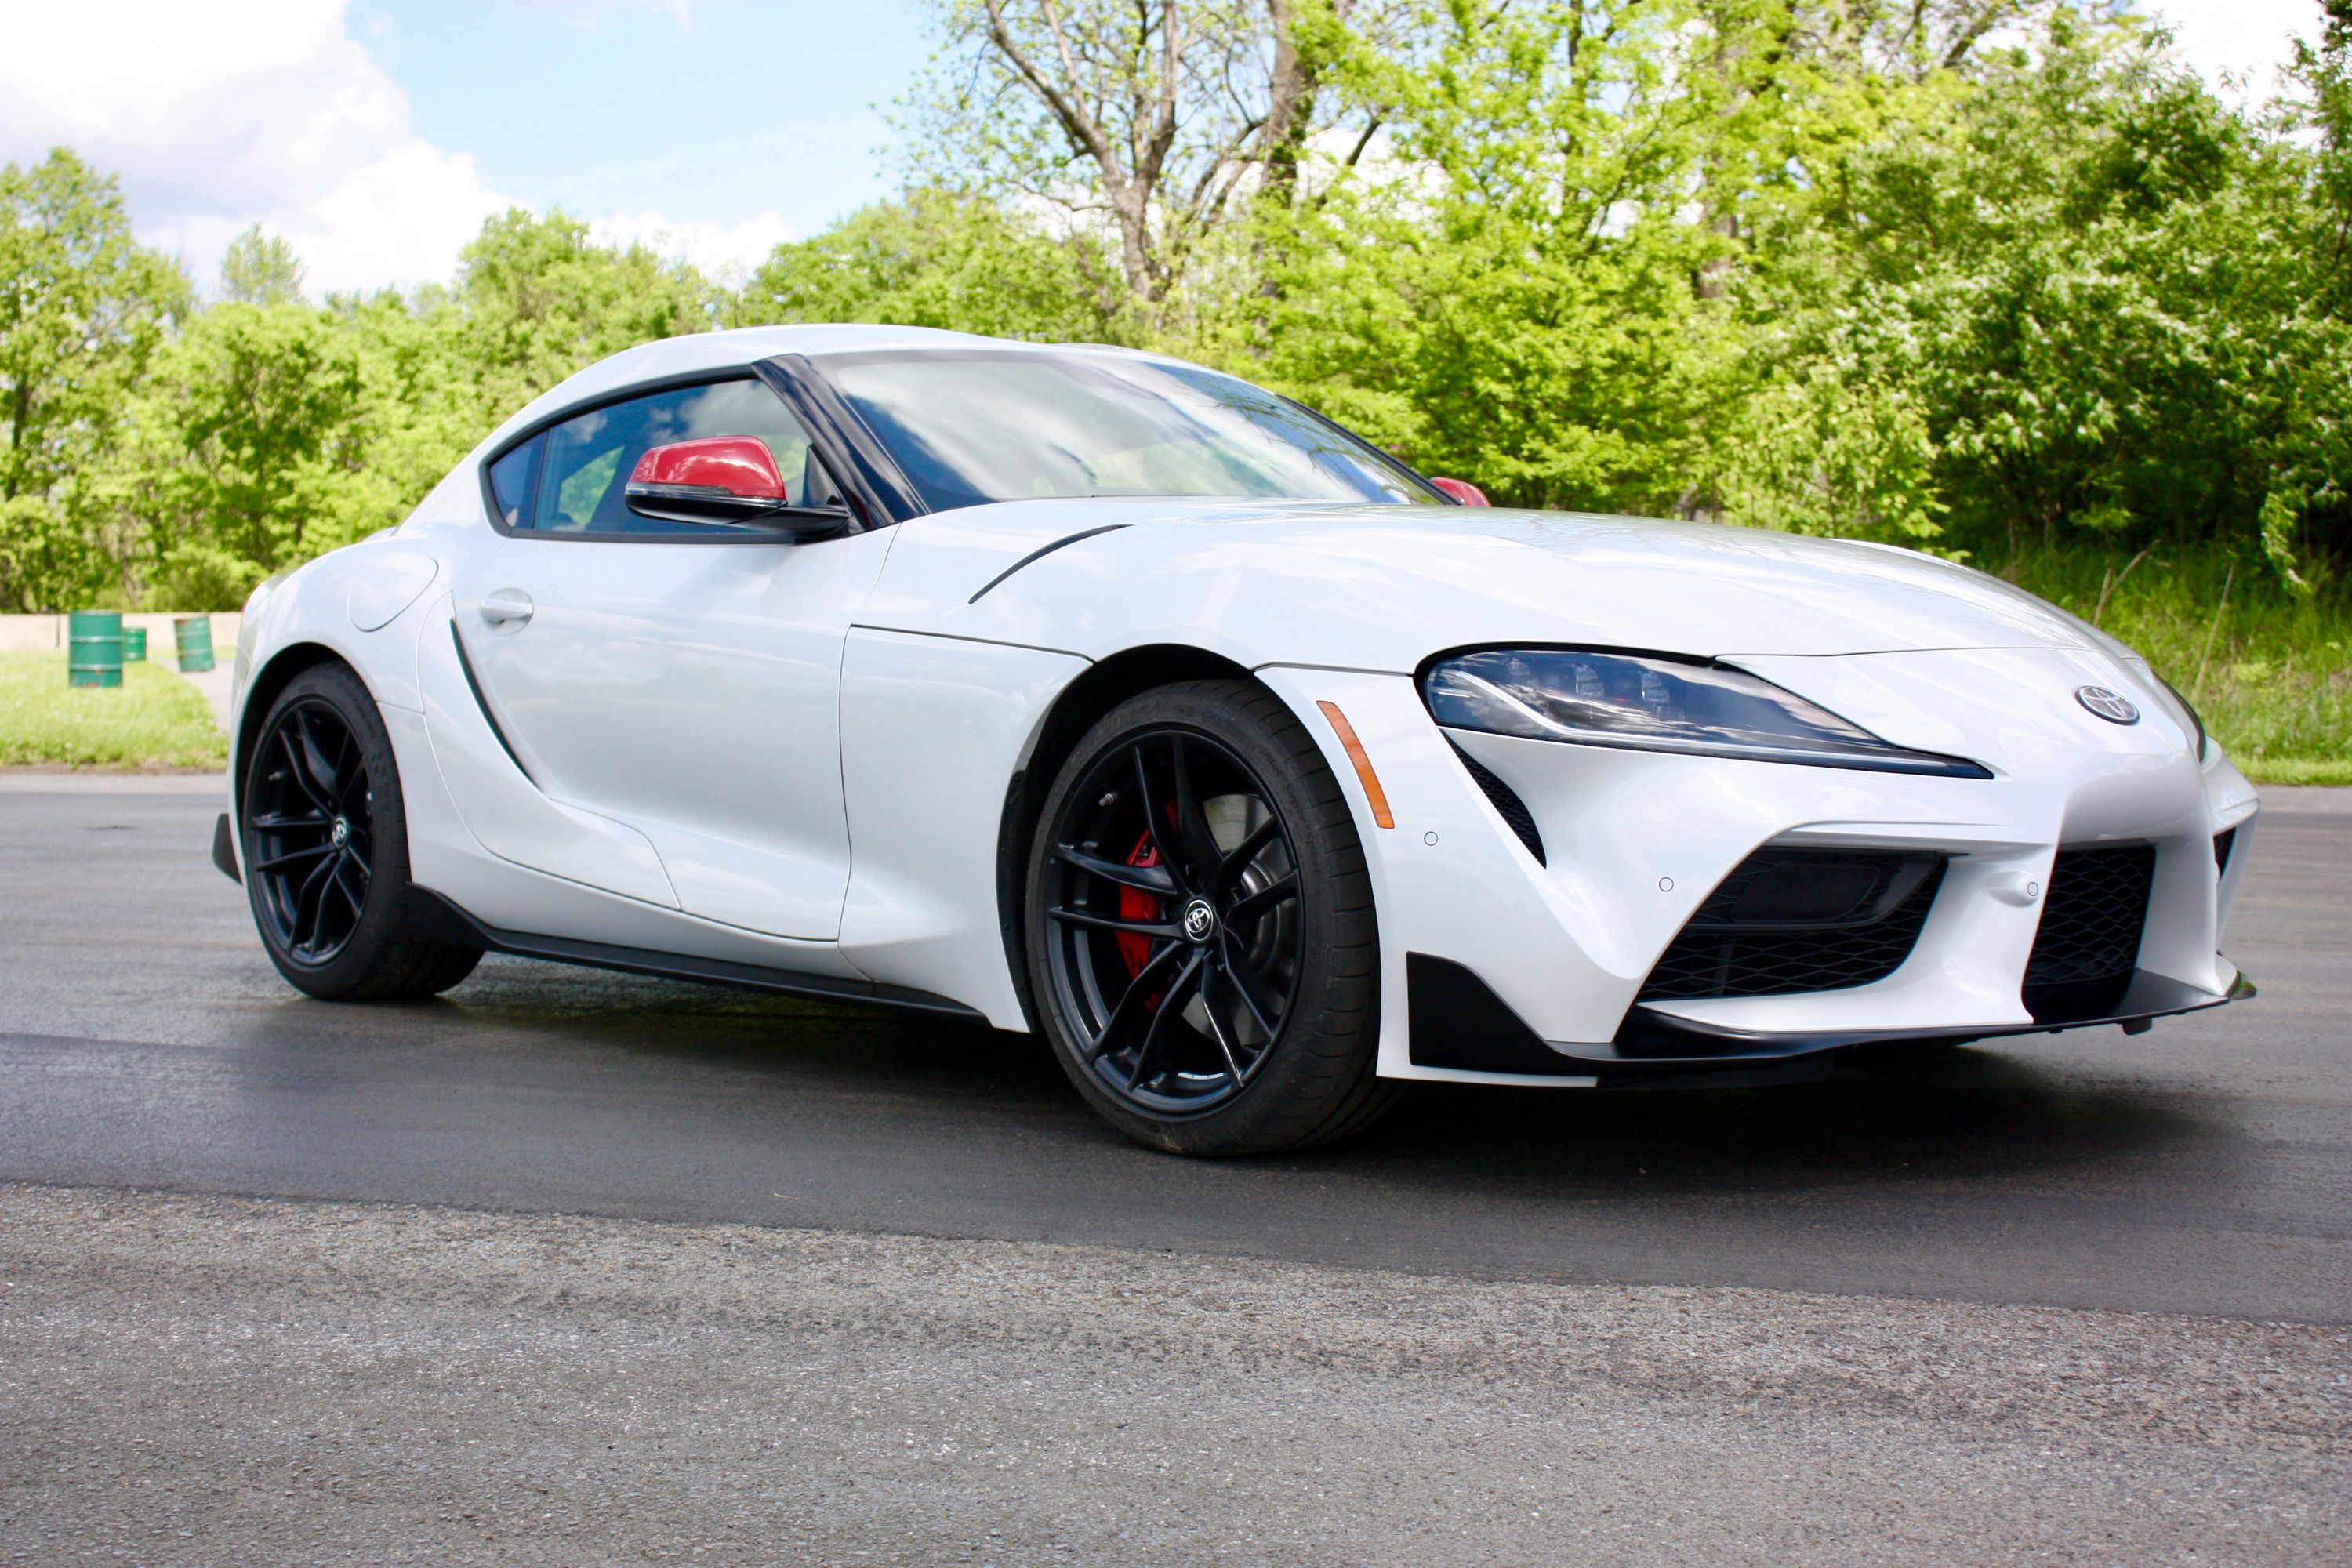 TopGear got their hands on a 2020 Toyota Supra - we can't believe how it ranks!